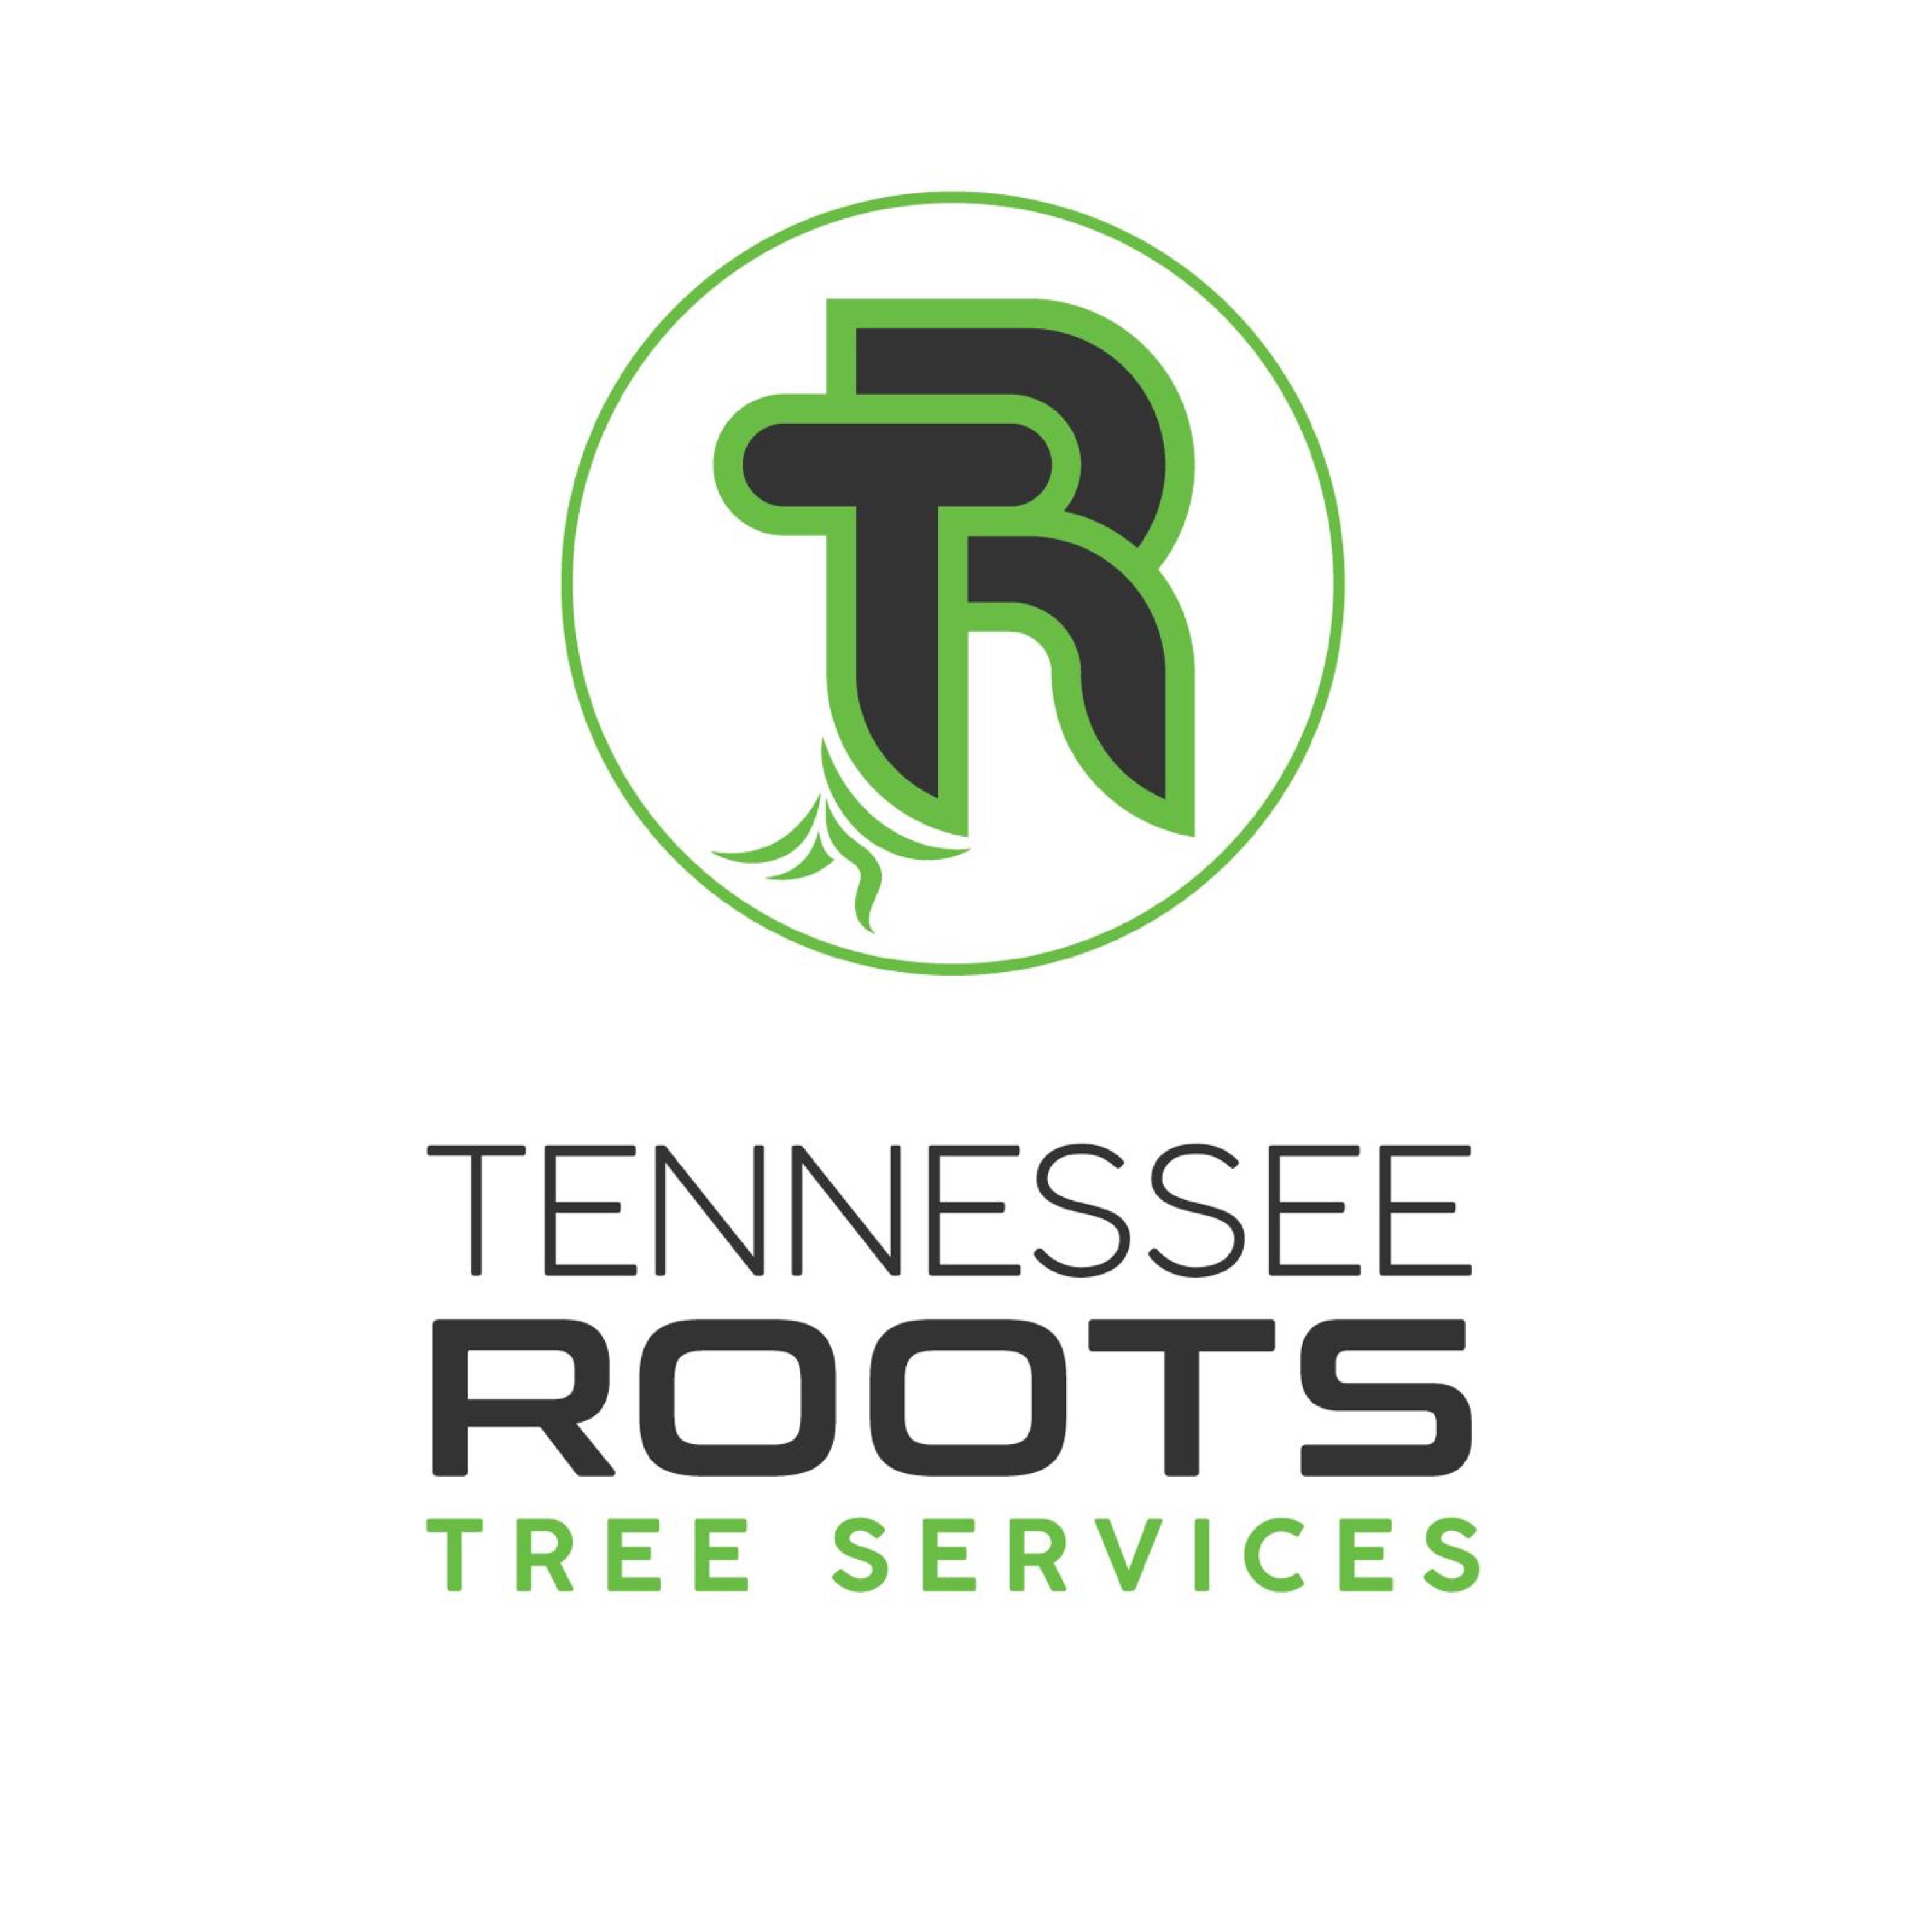 Tennessee Roots Tree Services Logo